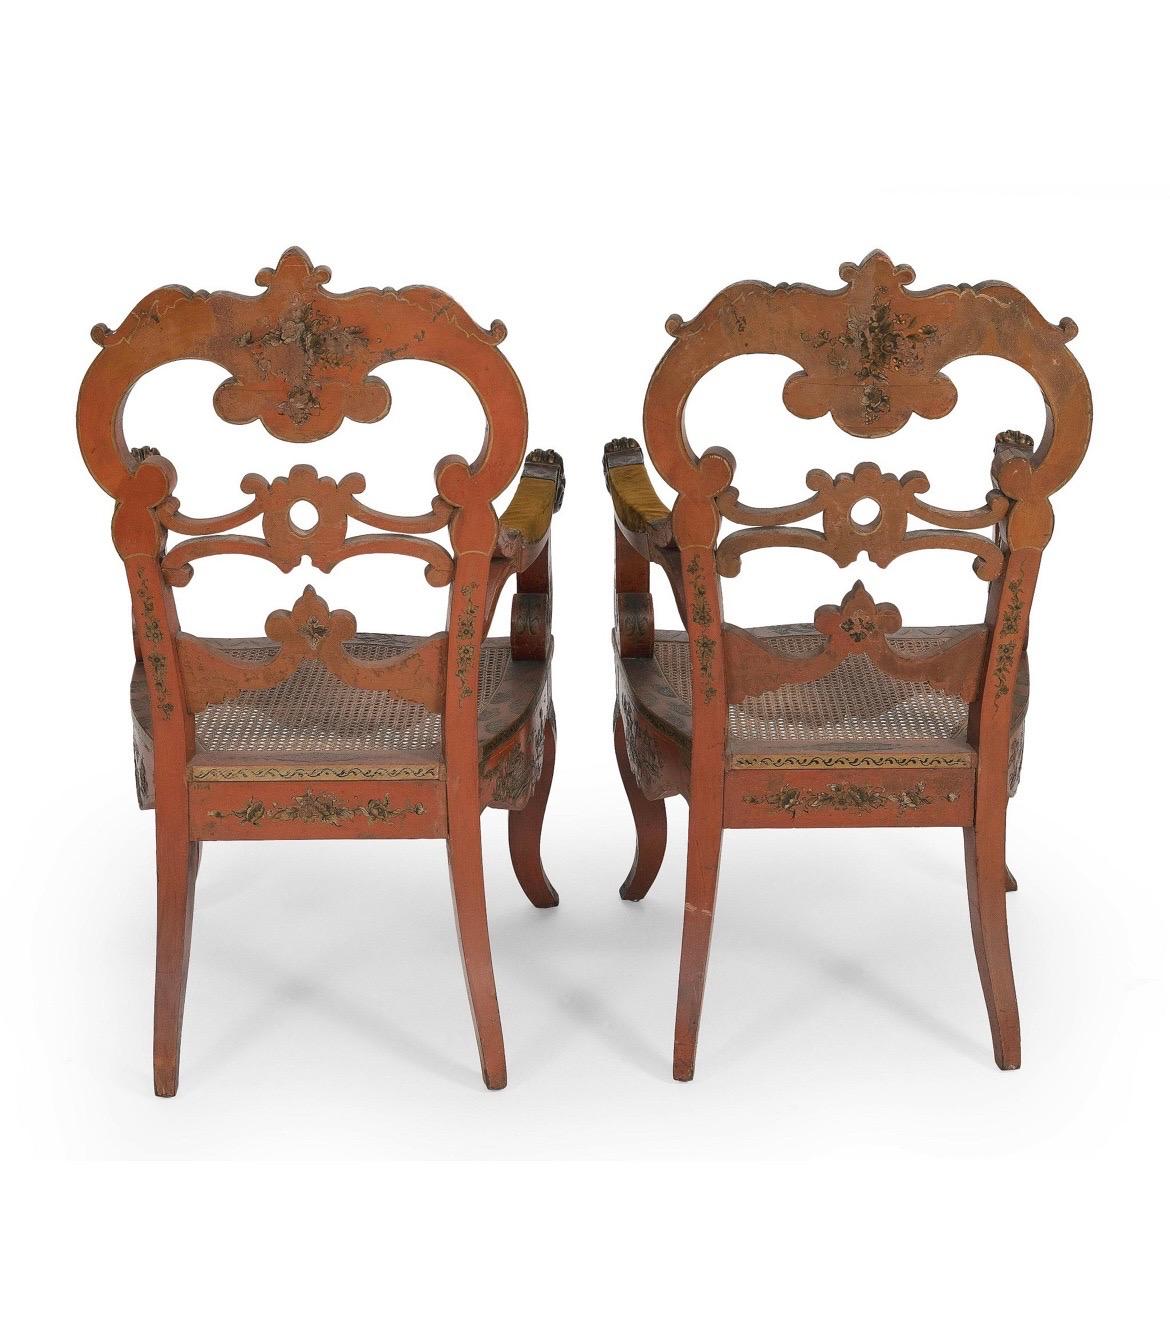 Venetian, Early 20th century. 

An exceptional pair of antique Venetian armchairs with a red lacquer ground and heavily painted gold gilt chinoiserie decoration across surfaces. Each chair features figural warriors, pagoda cities and traditional